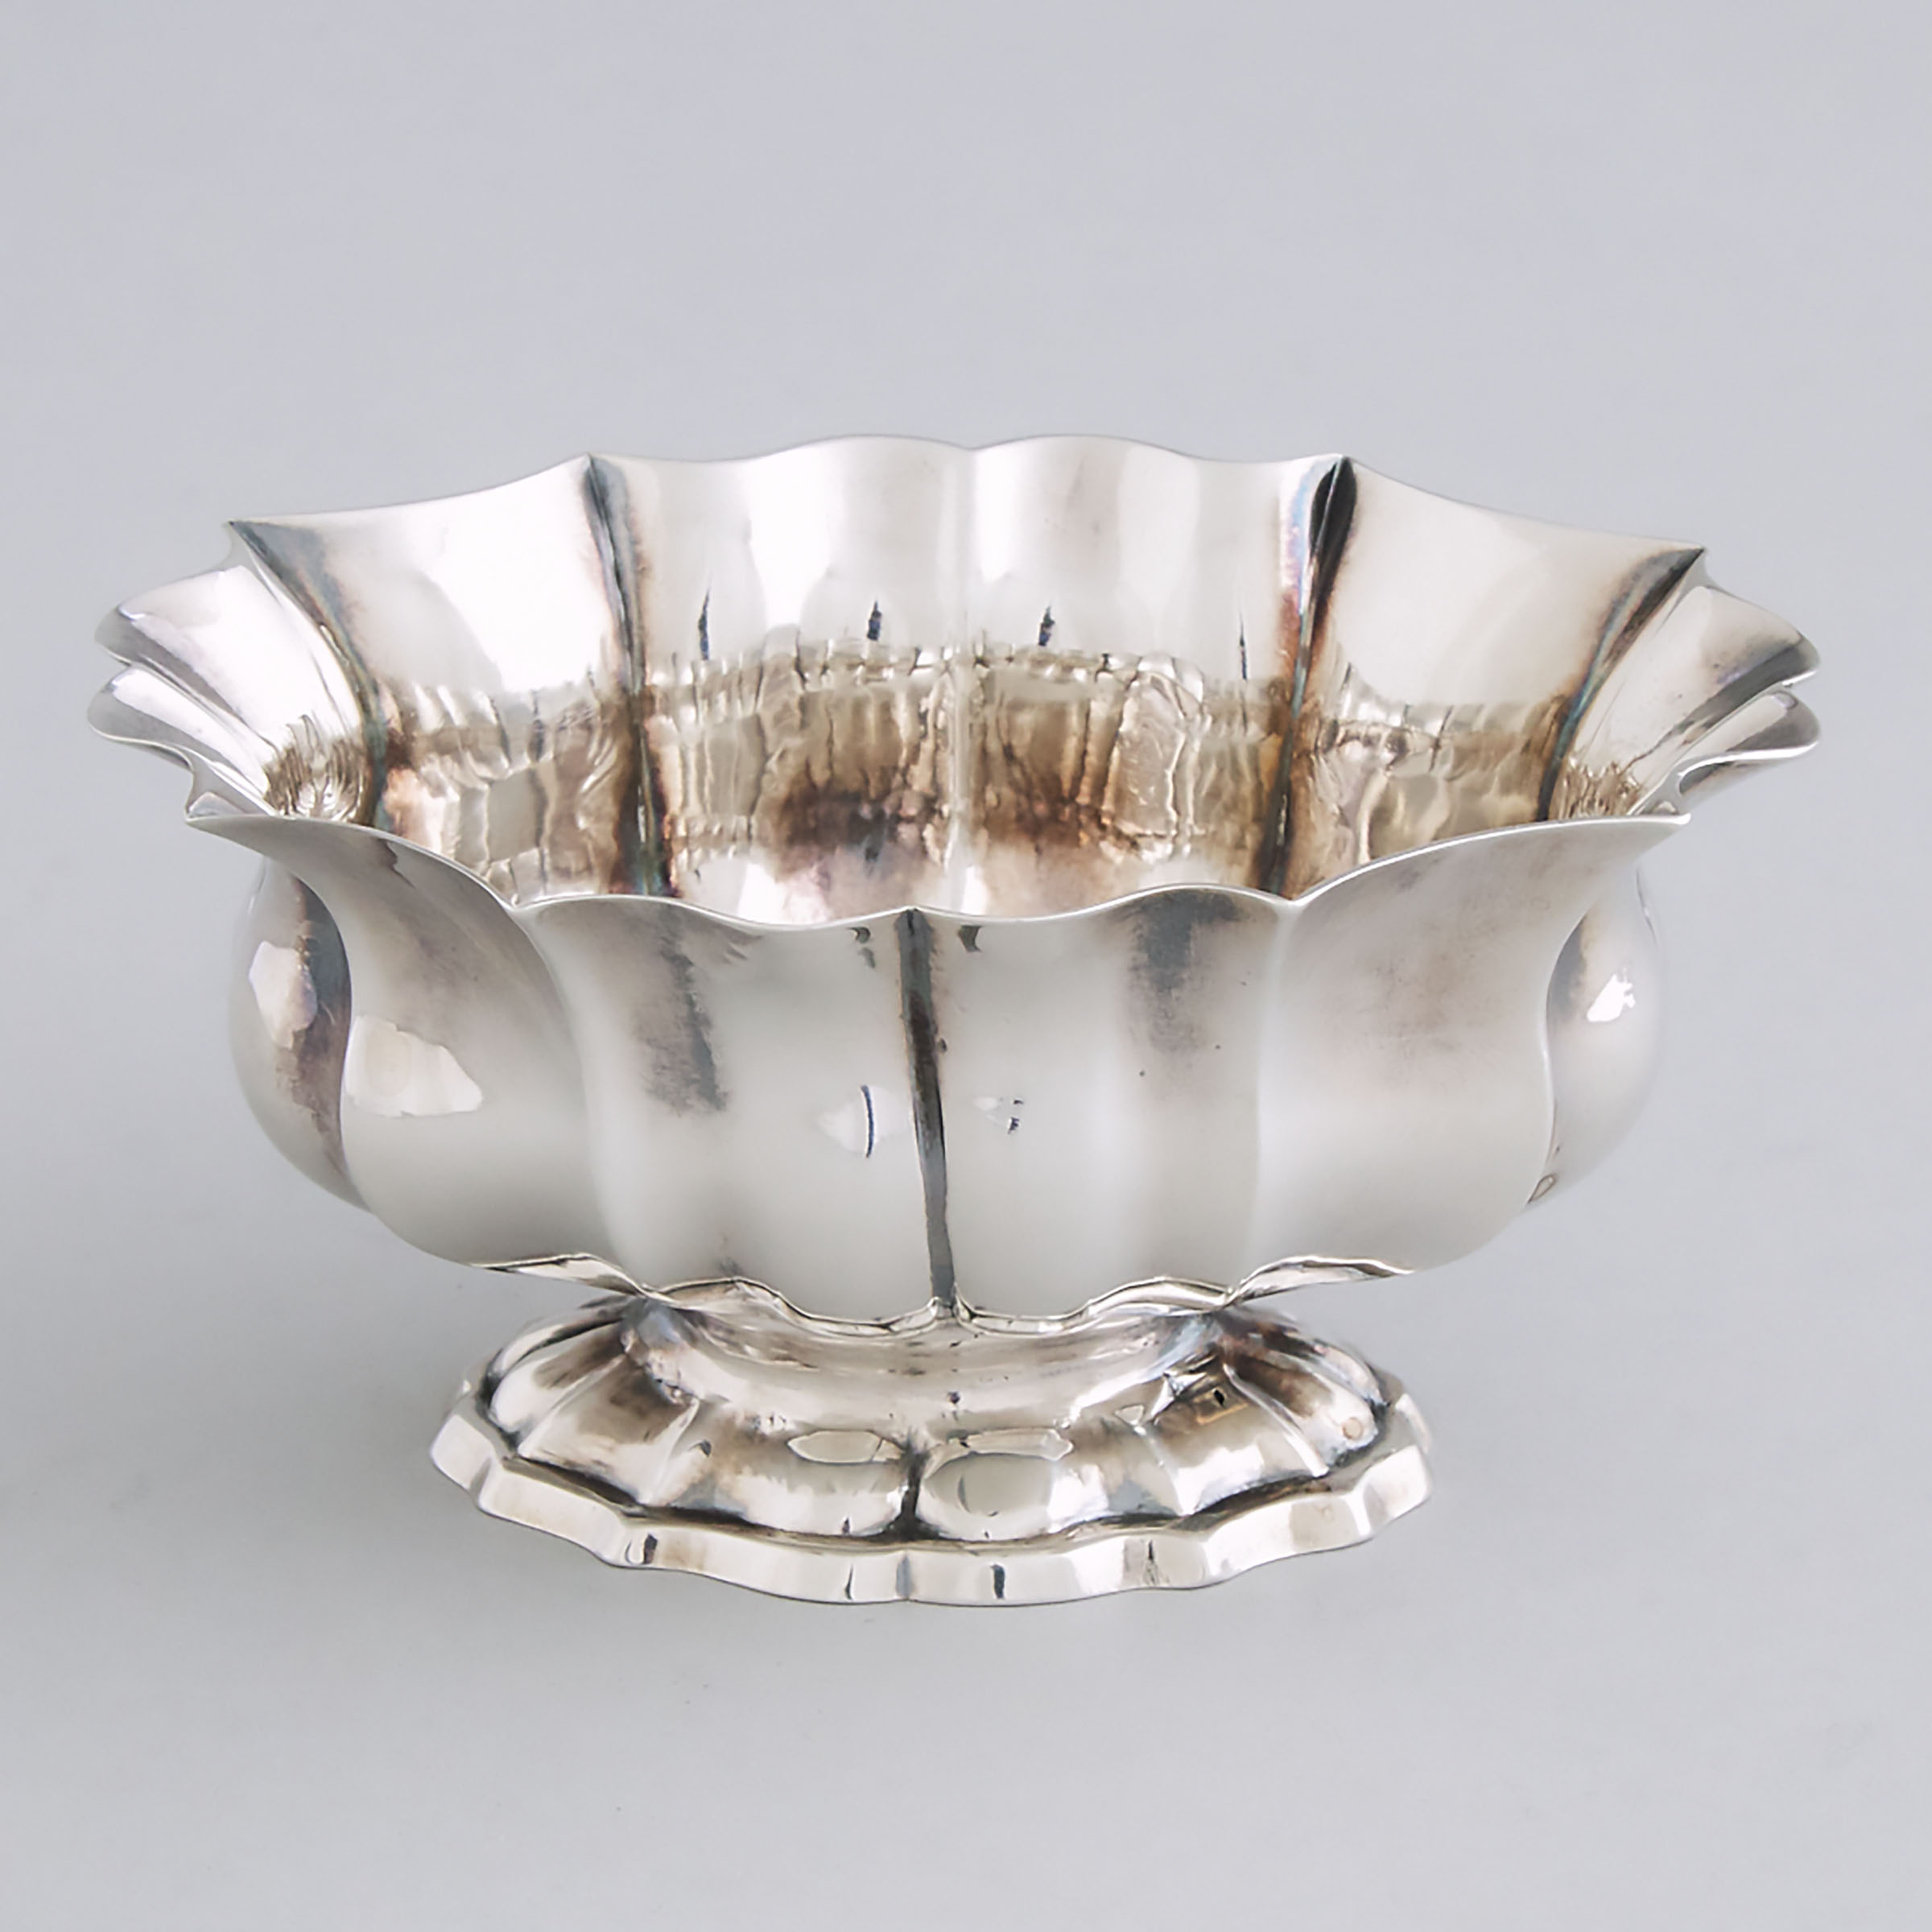 Continental Silver Small Oval Lobed Footed Bowl, probably German, early 19th century